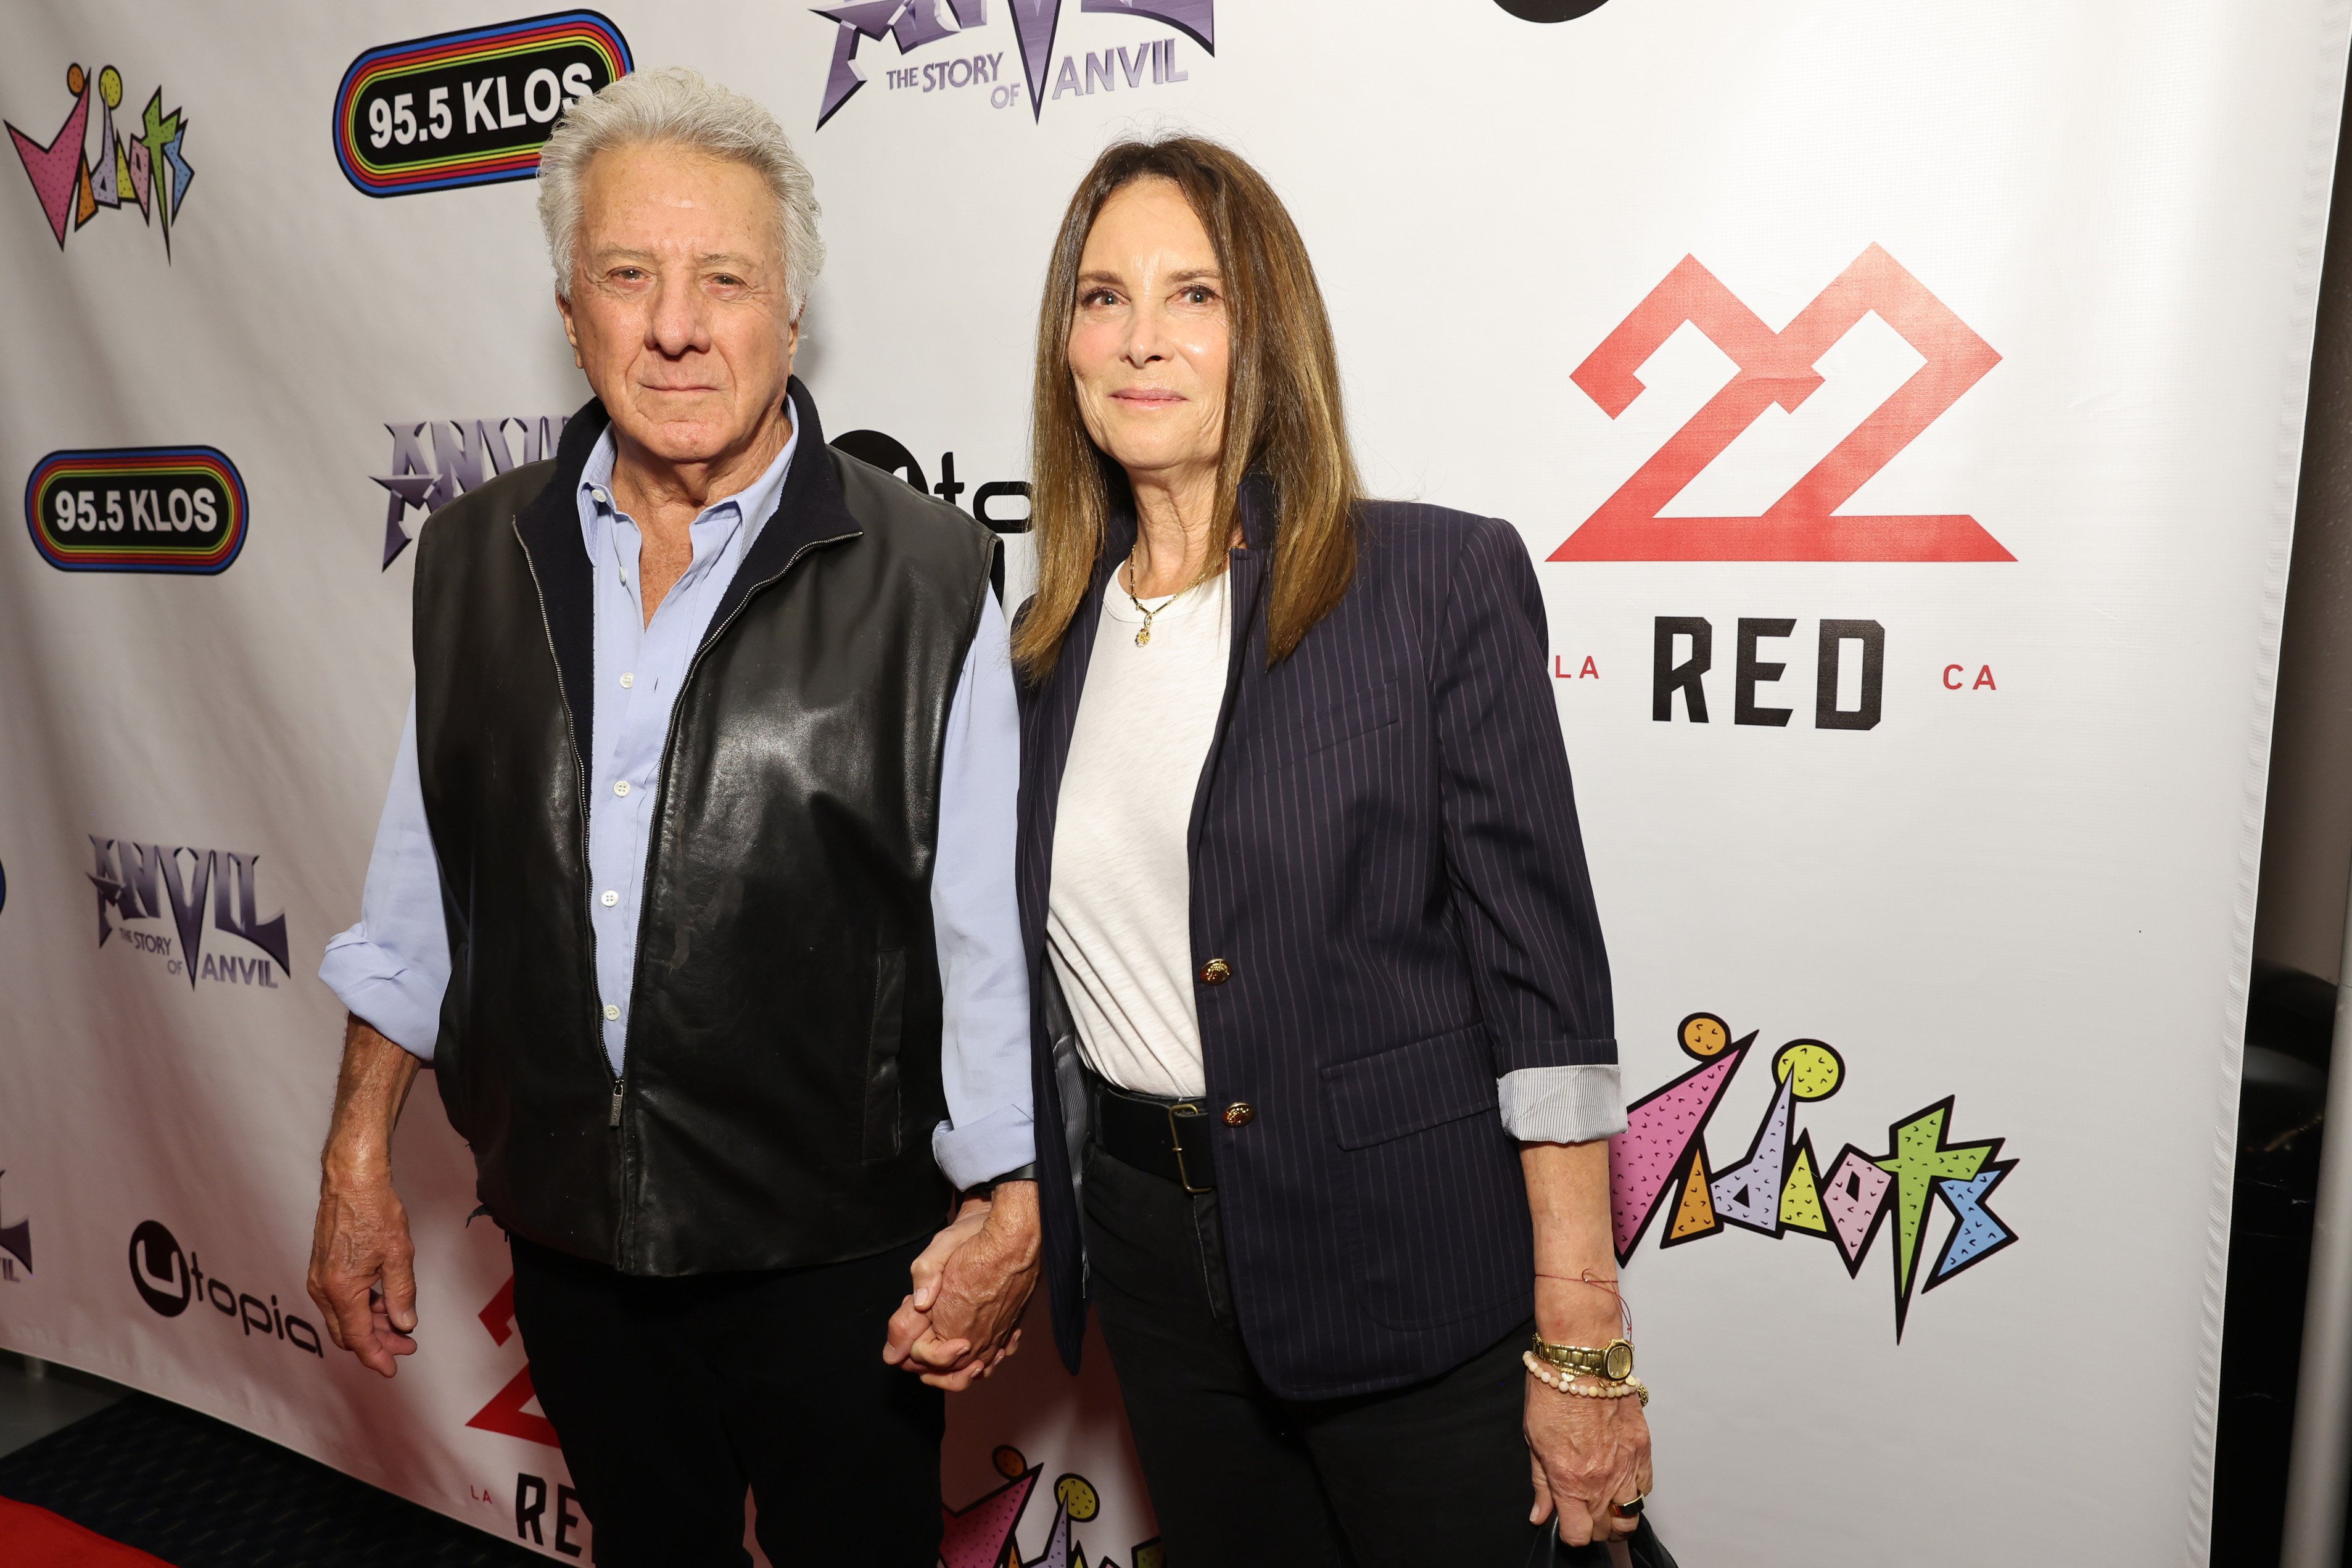 Dustin Hoffman and Lisa Hoffman attend Utopia Presents The World Premiere Of “Anvil! The Story Of Anvil” At The Saban Theatre on September 22, 2022 in Beverly Hills, California | Source: Getty Images